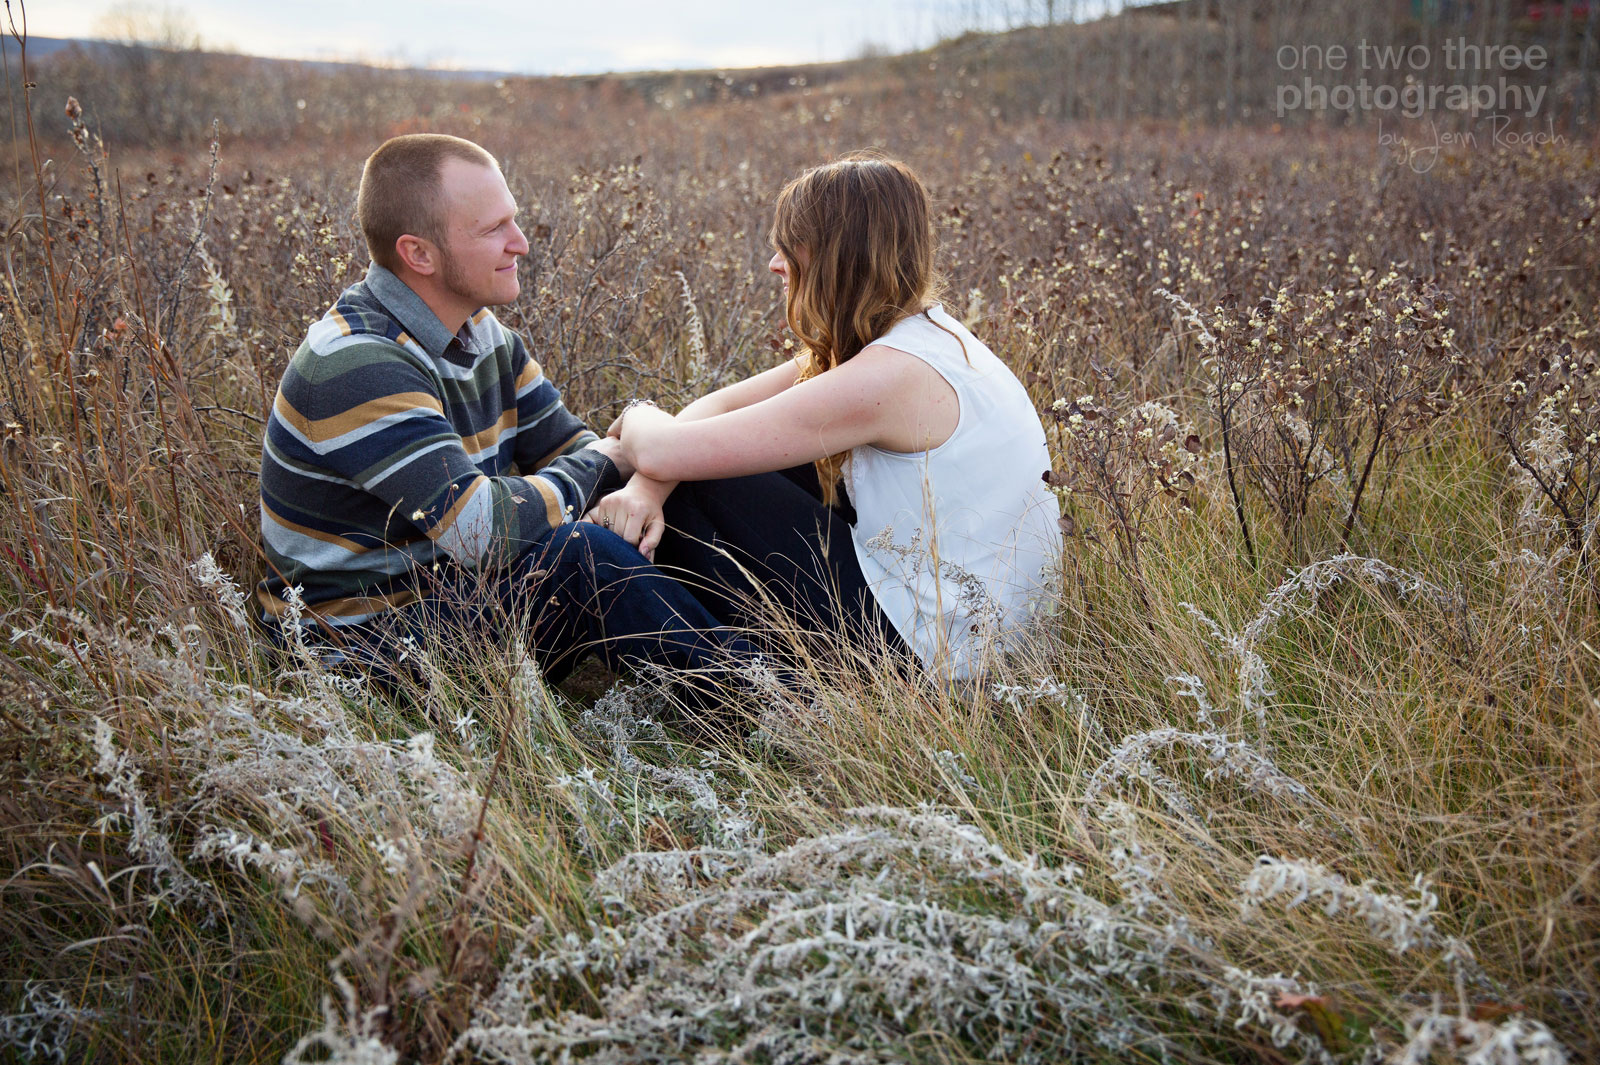 Dave and Katie amongst the tall fall grasses